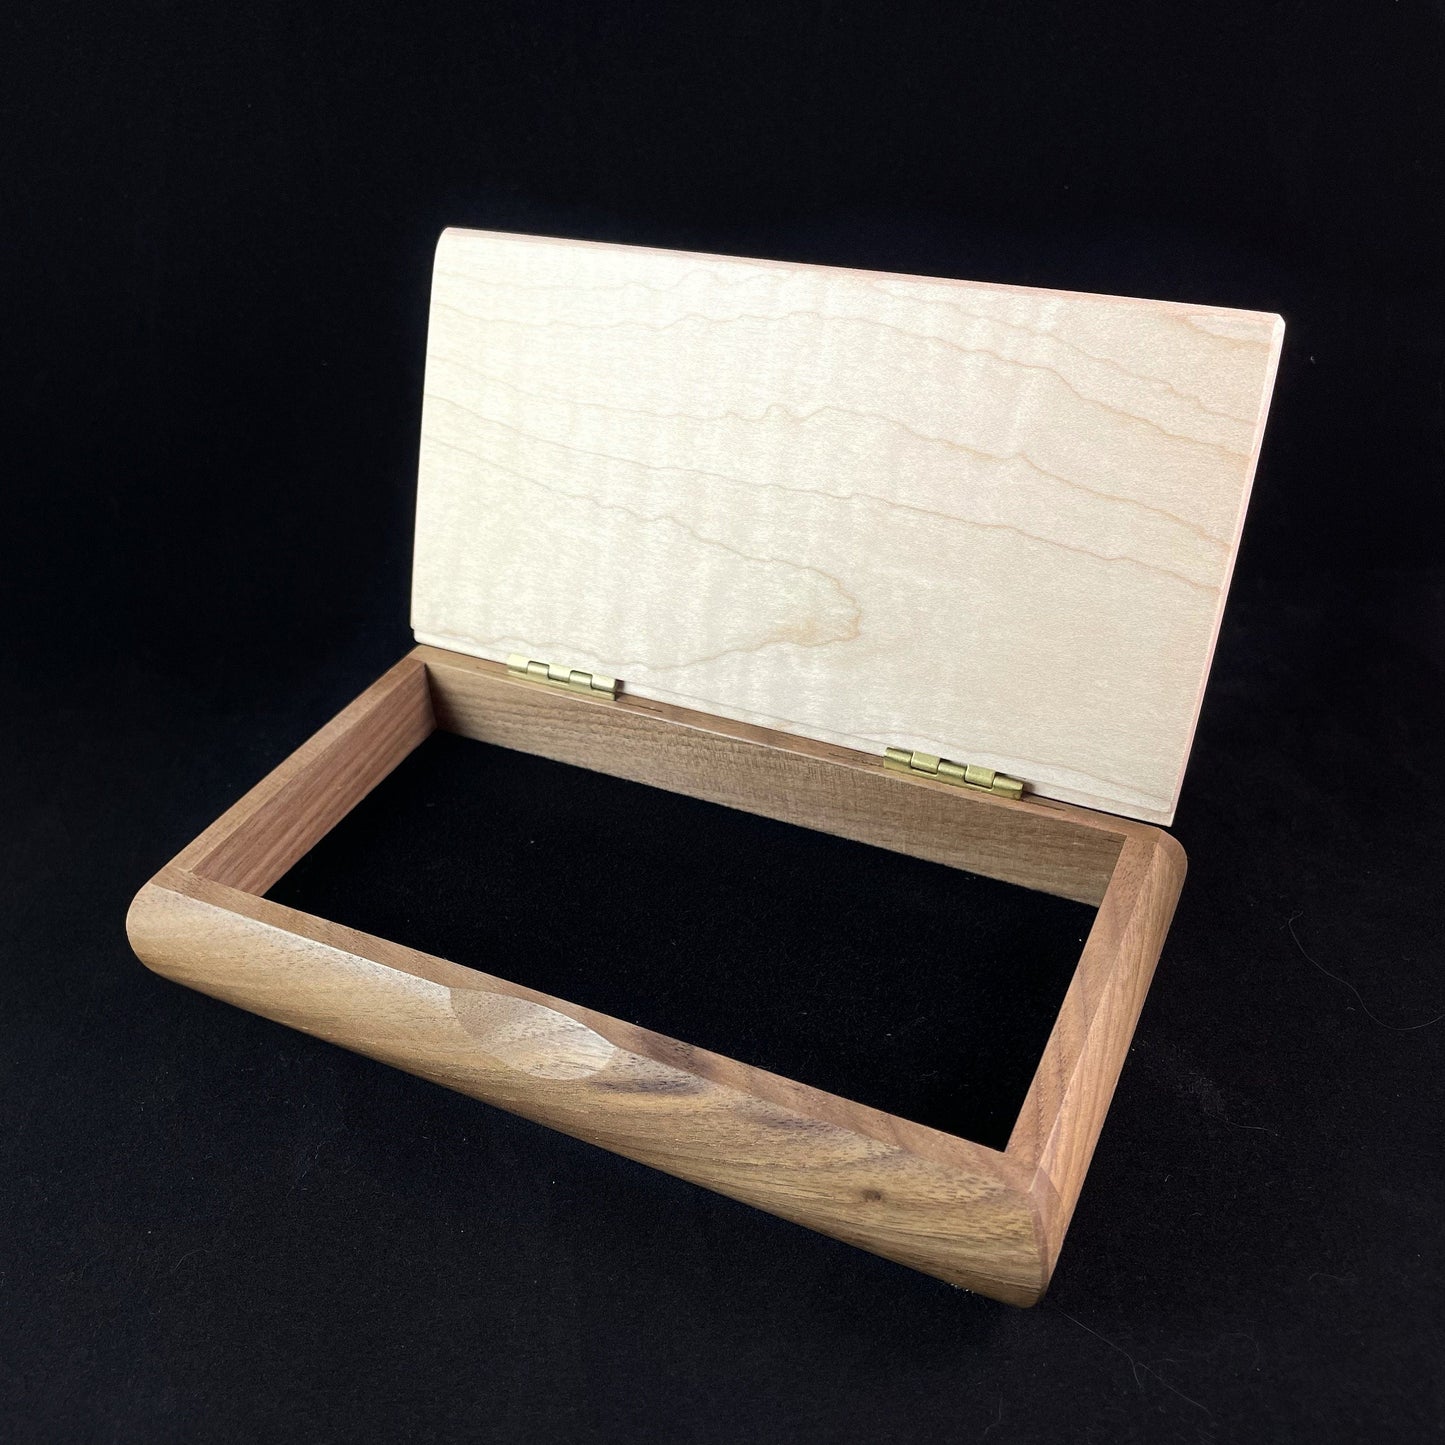 Great Lakes Handmade Wooden Box - Curly Maple and Walnut